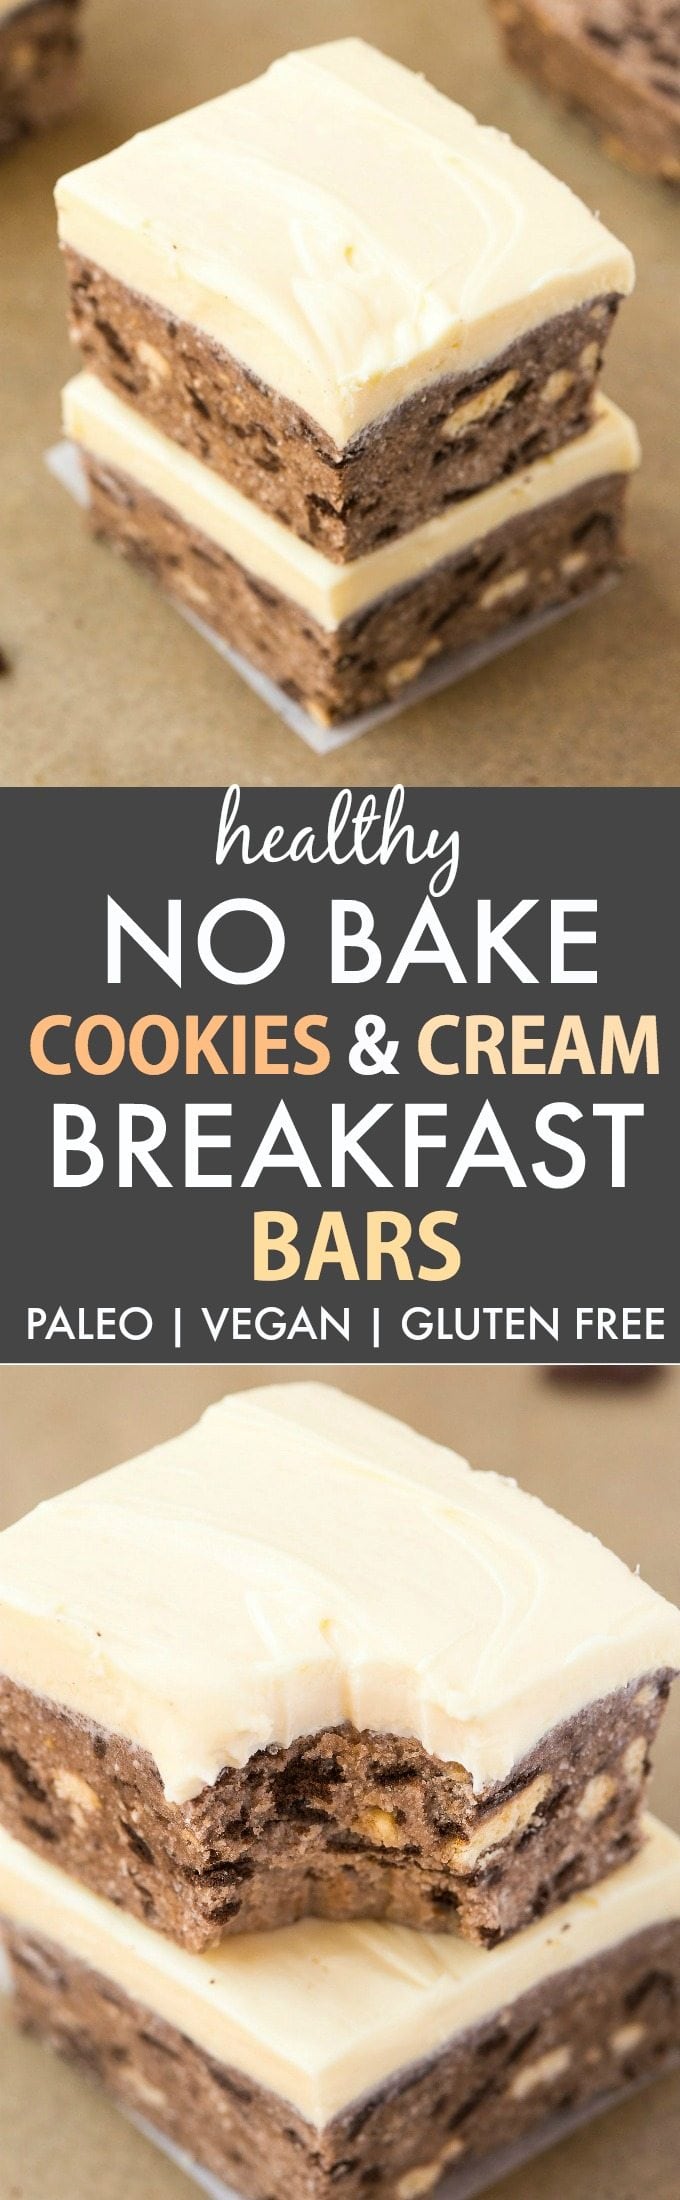 Healthy No Bake Cookies and Cream Breakfast Bars (V, GF, P, SF)- Enjoy dessert for breakfast with this guilt-free, grab-and-go, portable, easy no bake bars which are just like a cookies and cream cheesecake- {vegan, gluten free, paleo recipe}- thebigmansworld.com